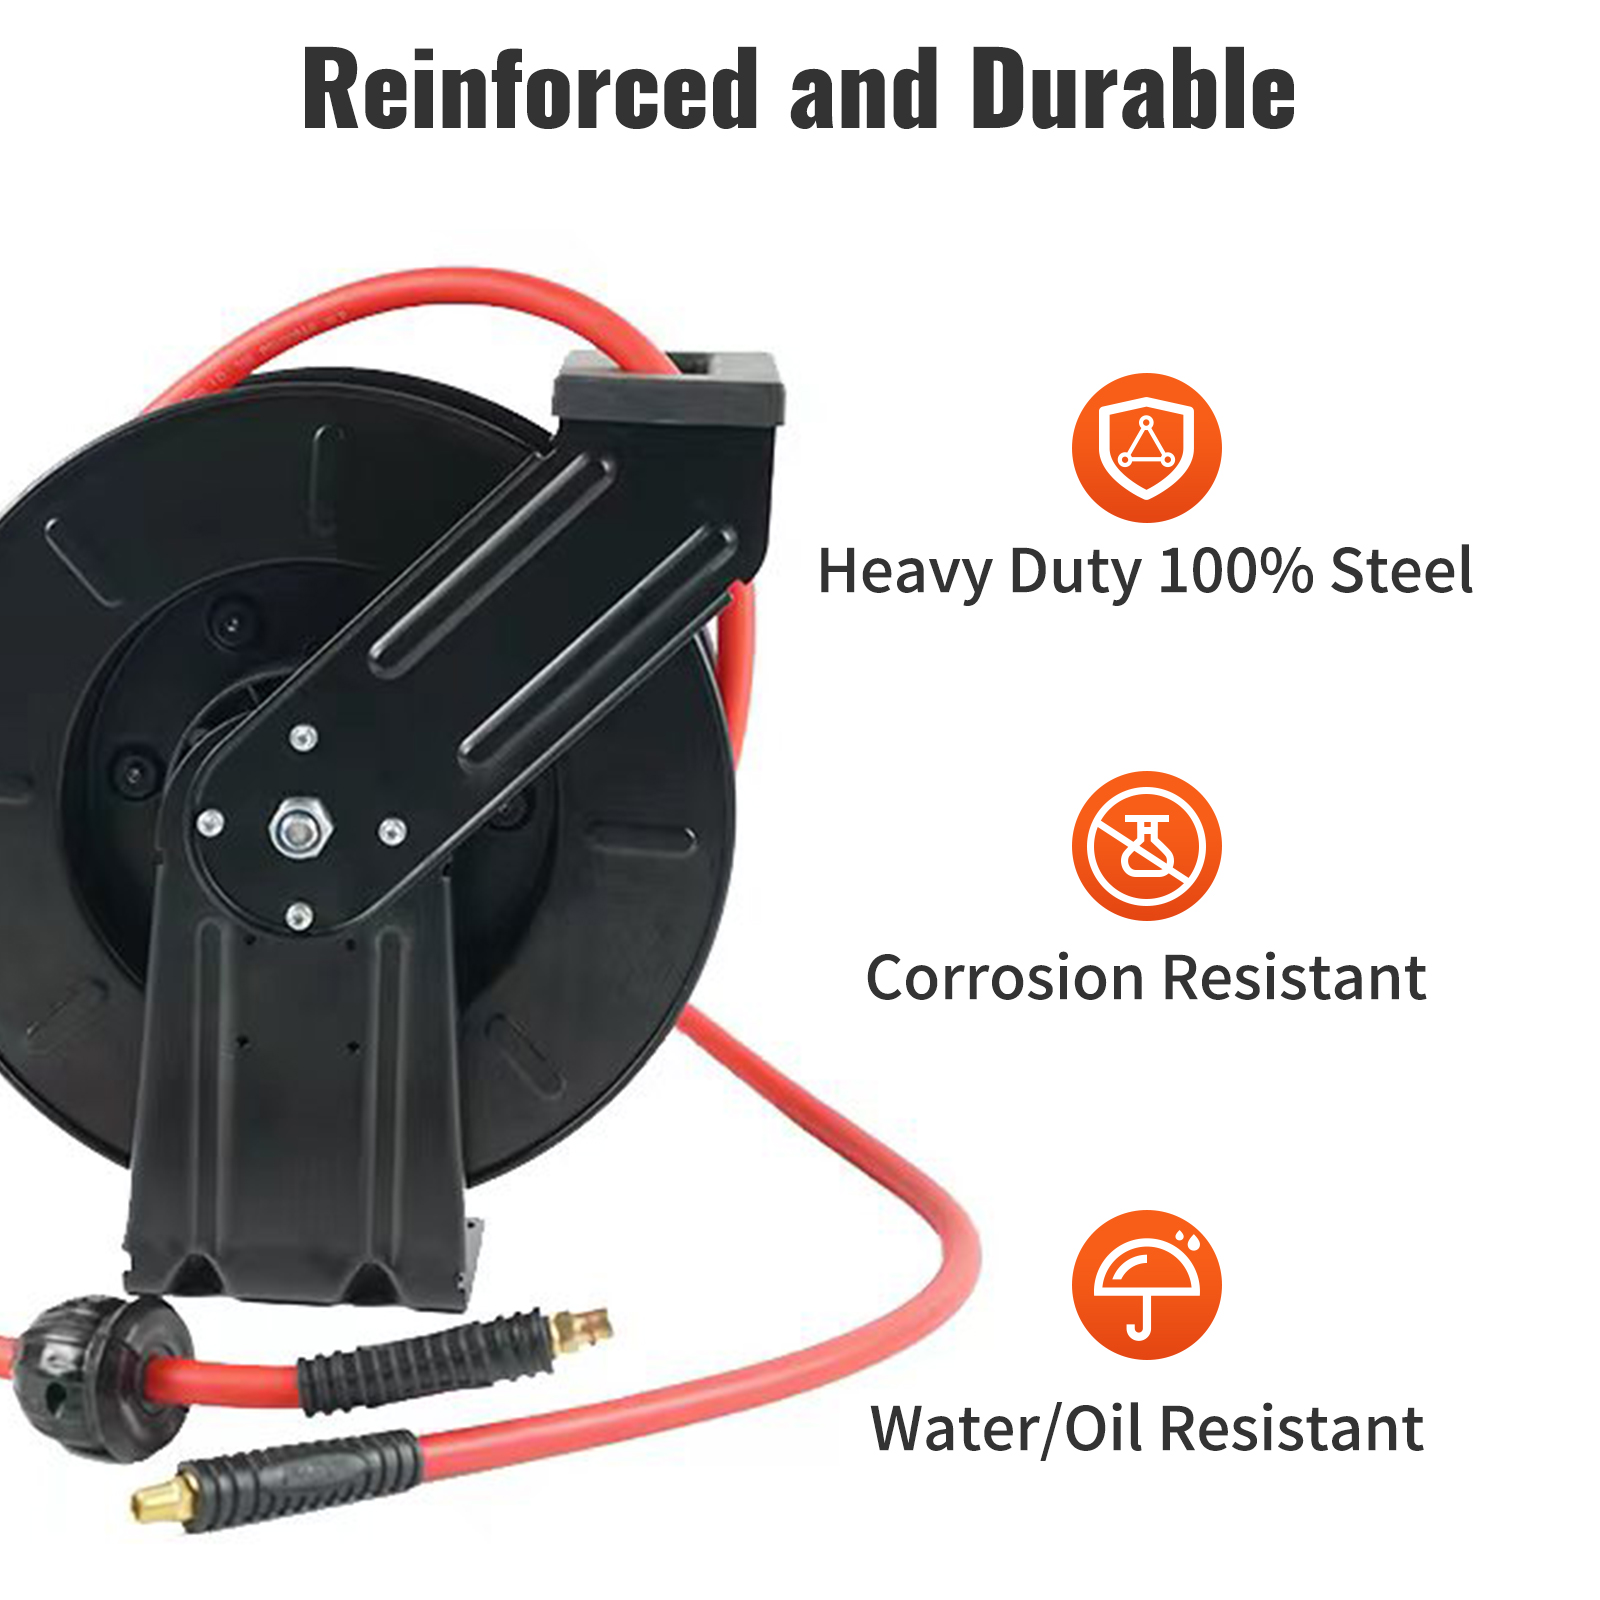 Maximize Convenience with the Inexpensive VEVOR Retractable Air Hose Reel 